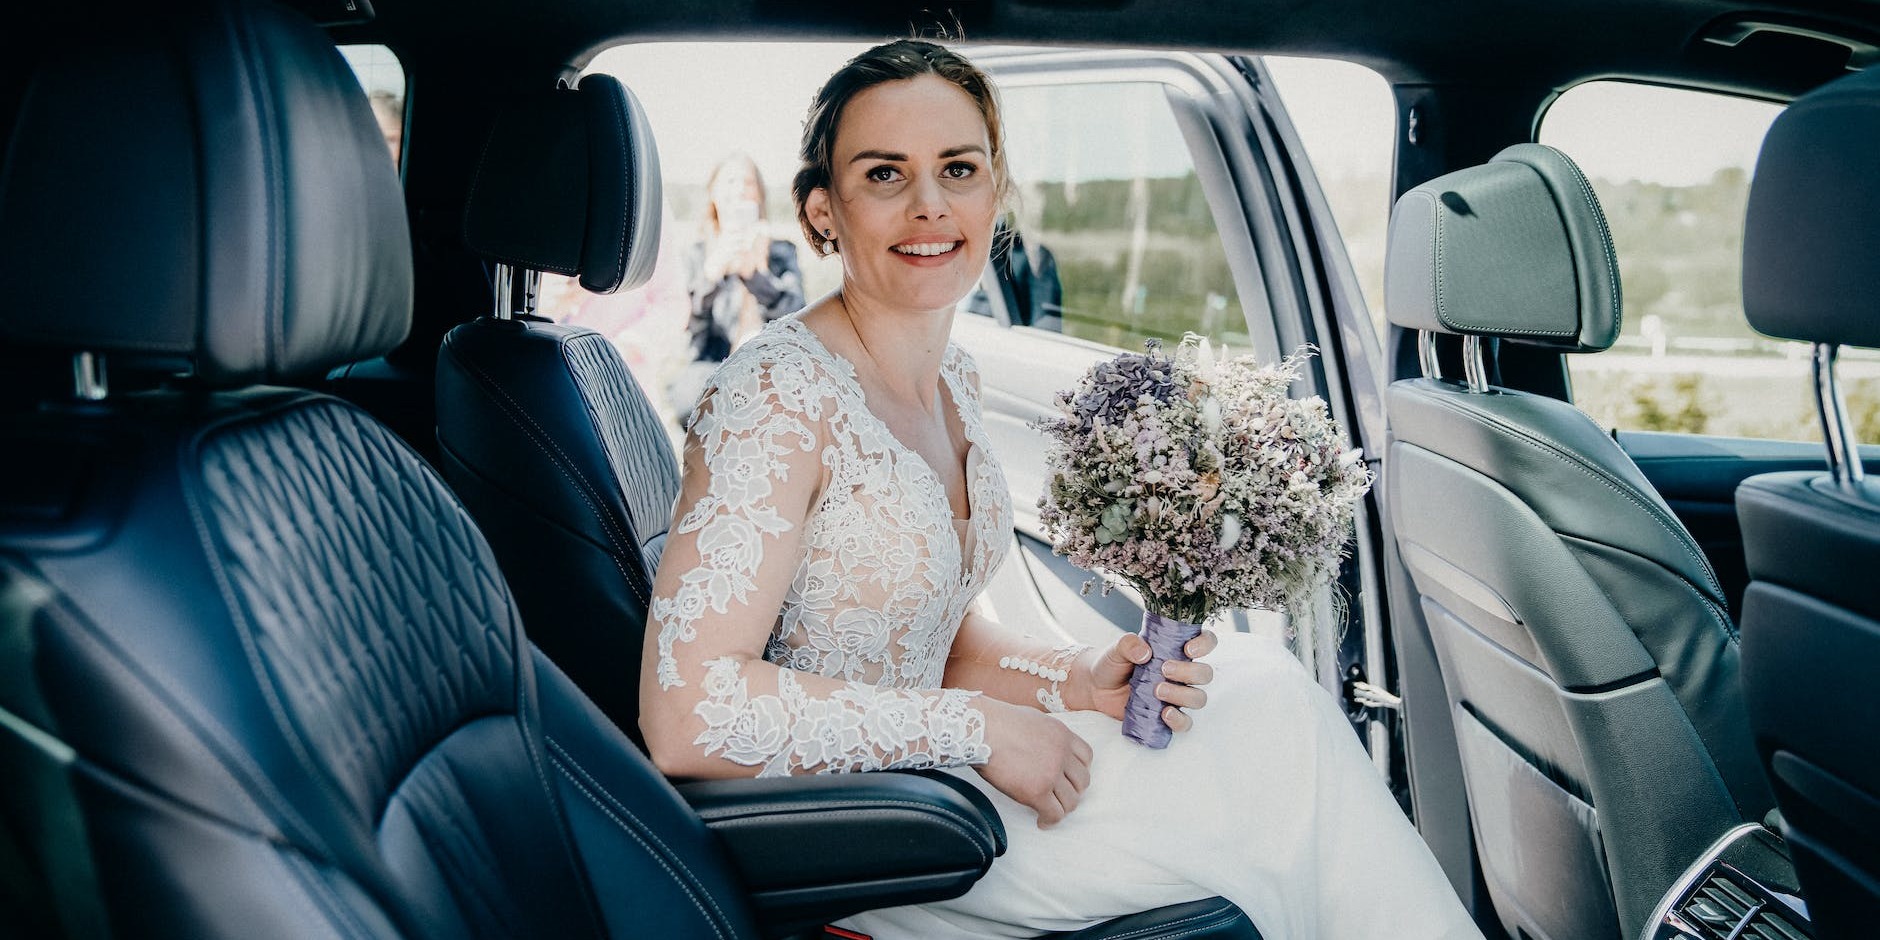 Top Tips for a Stress-Free Wedding: Transport Solutions for UK Ceremonies